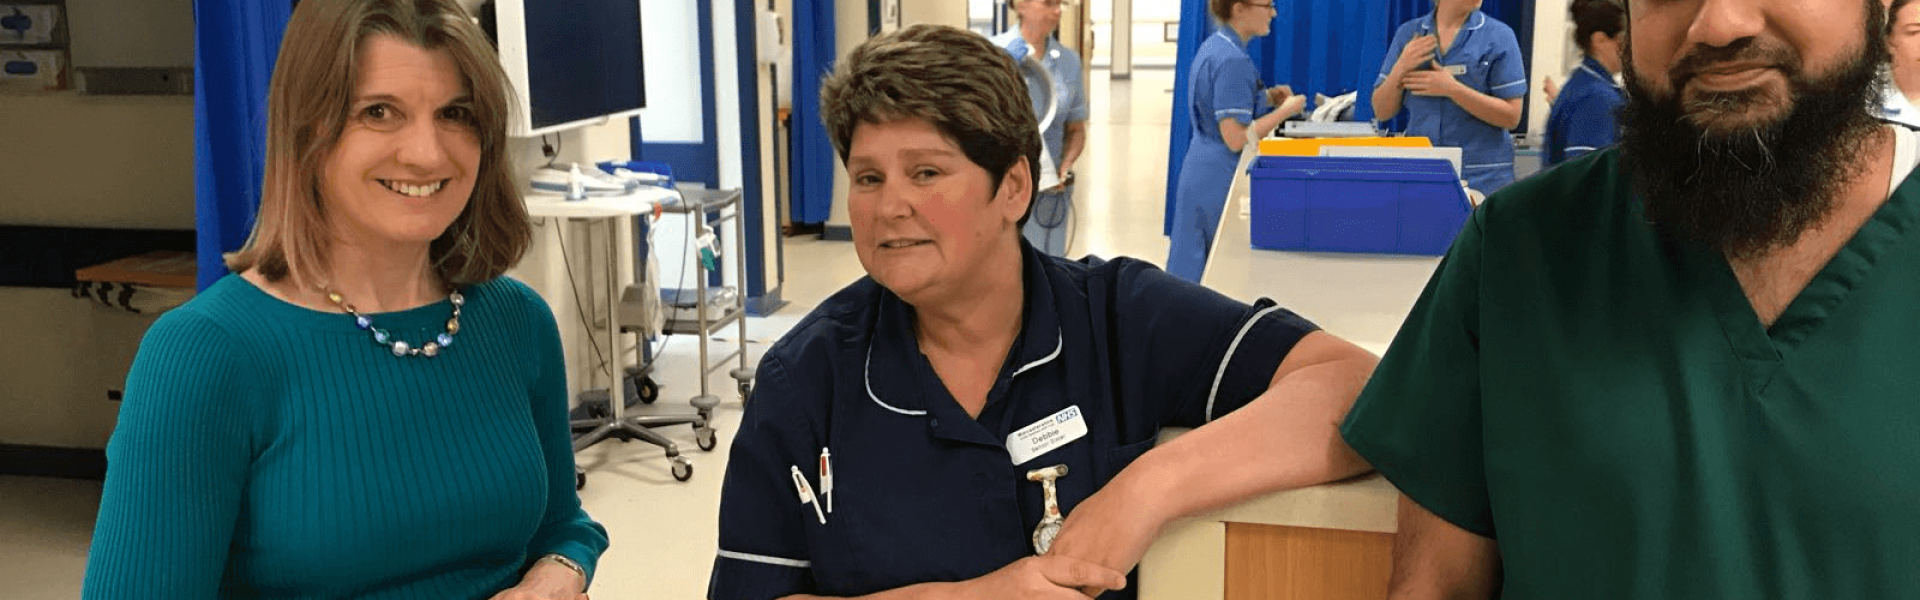 To mark the 70th birthday of the NHS this year, Rachel Maclean, MP for Redditch County, is urging residents to help in her search for local NHS heroes to nominate for prestigious Parliamentary awards. The NHS70 Parliamentary Awards will take place this July to celebrate the work of our dedicated NHS staff and those who work alongside them. There are 10 awards in total and Rachel is asking residents to come forward with nominations she can submit. The award judges are looking for outstanding nominees who hav